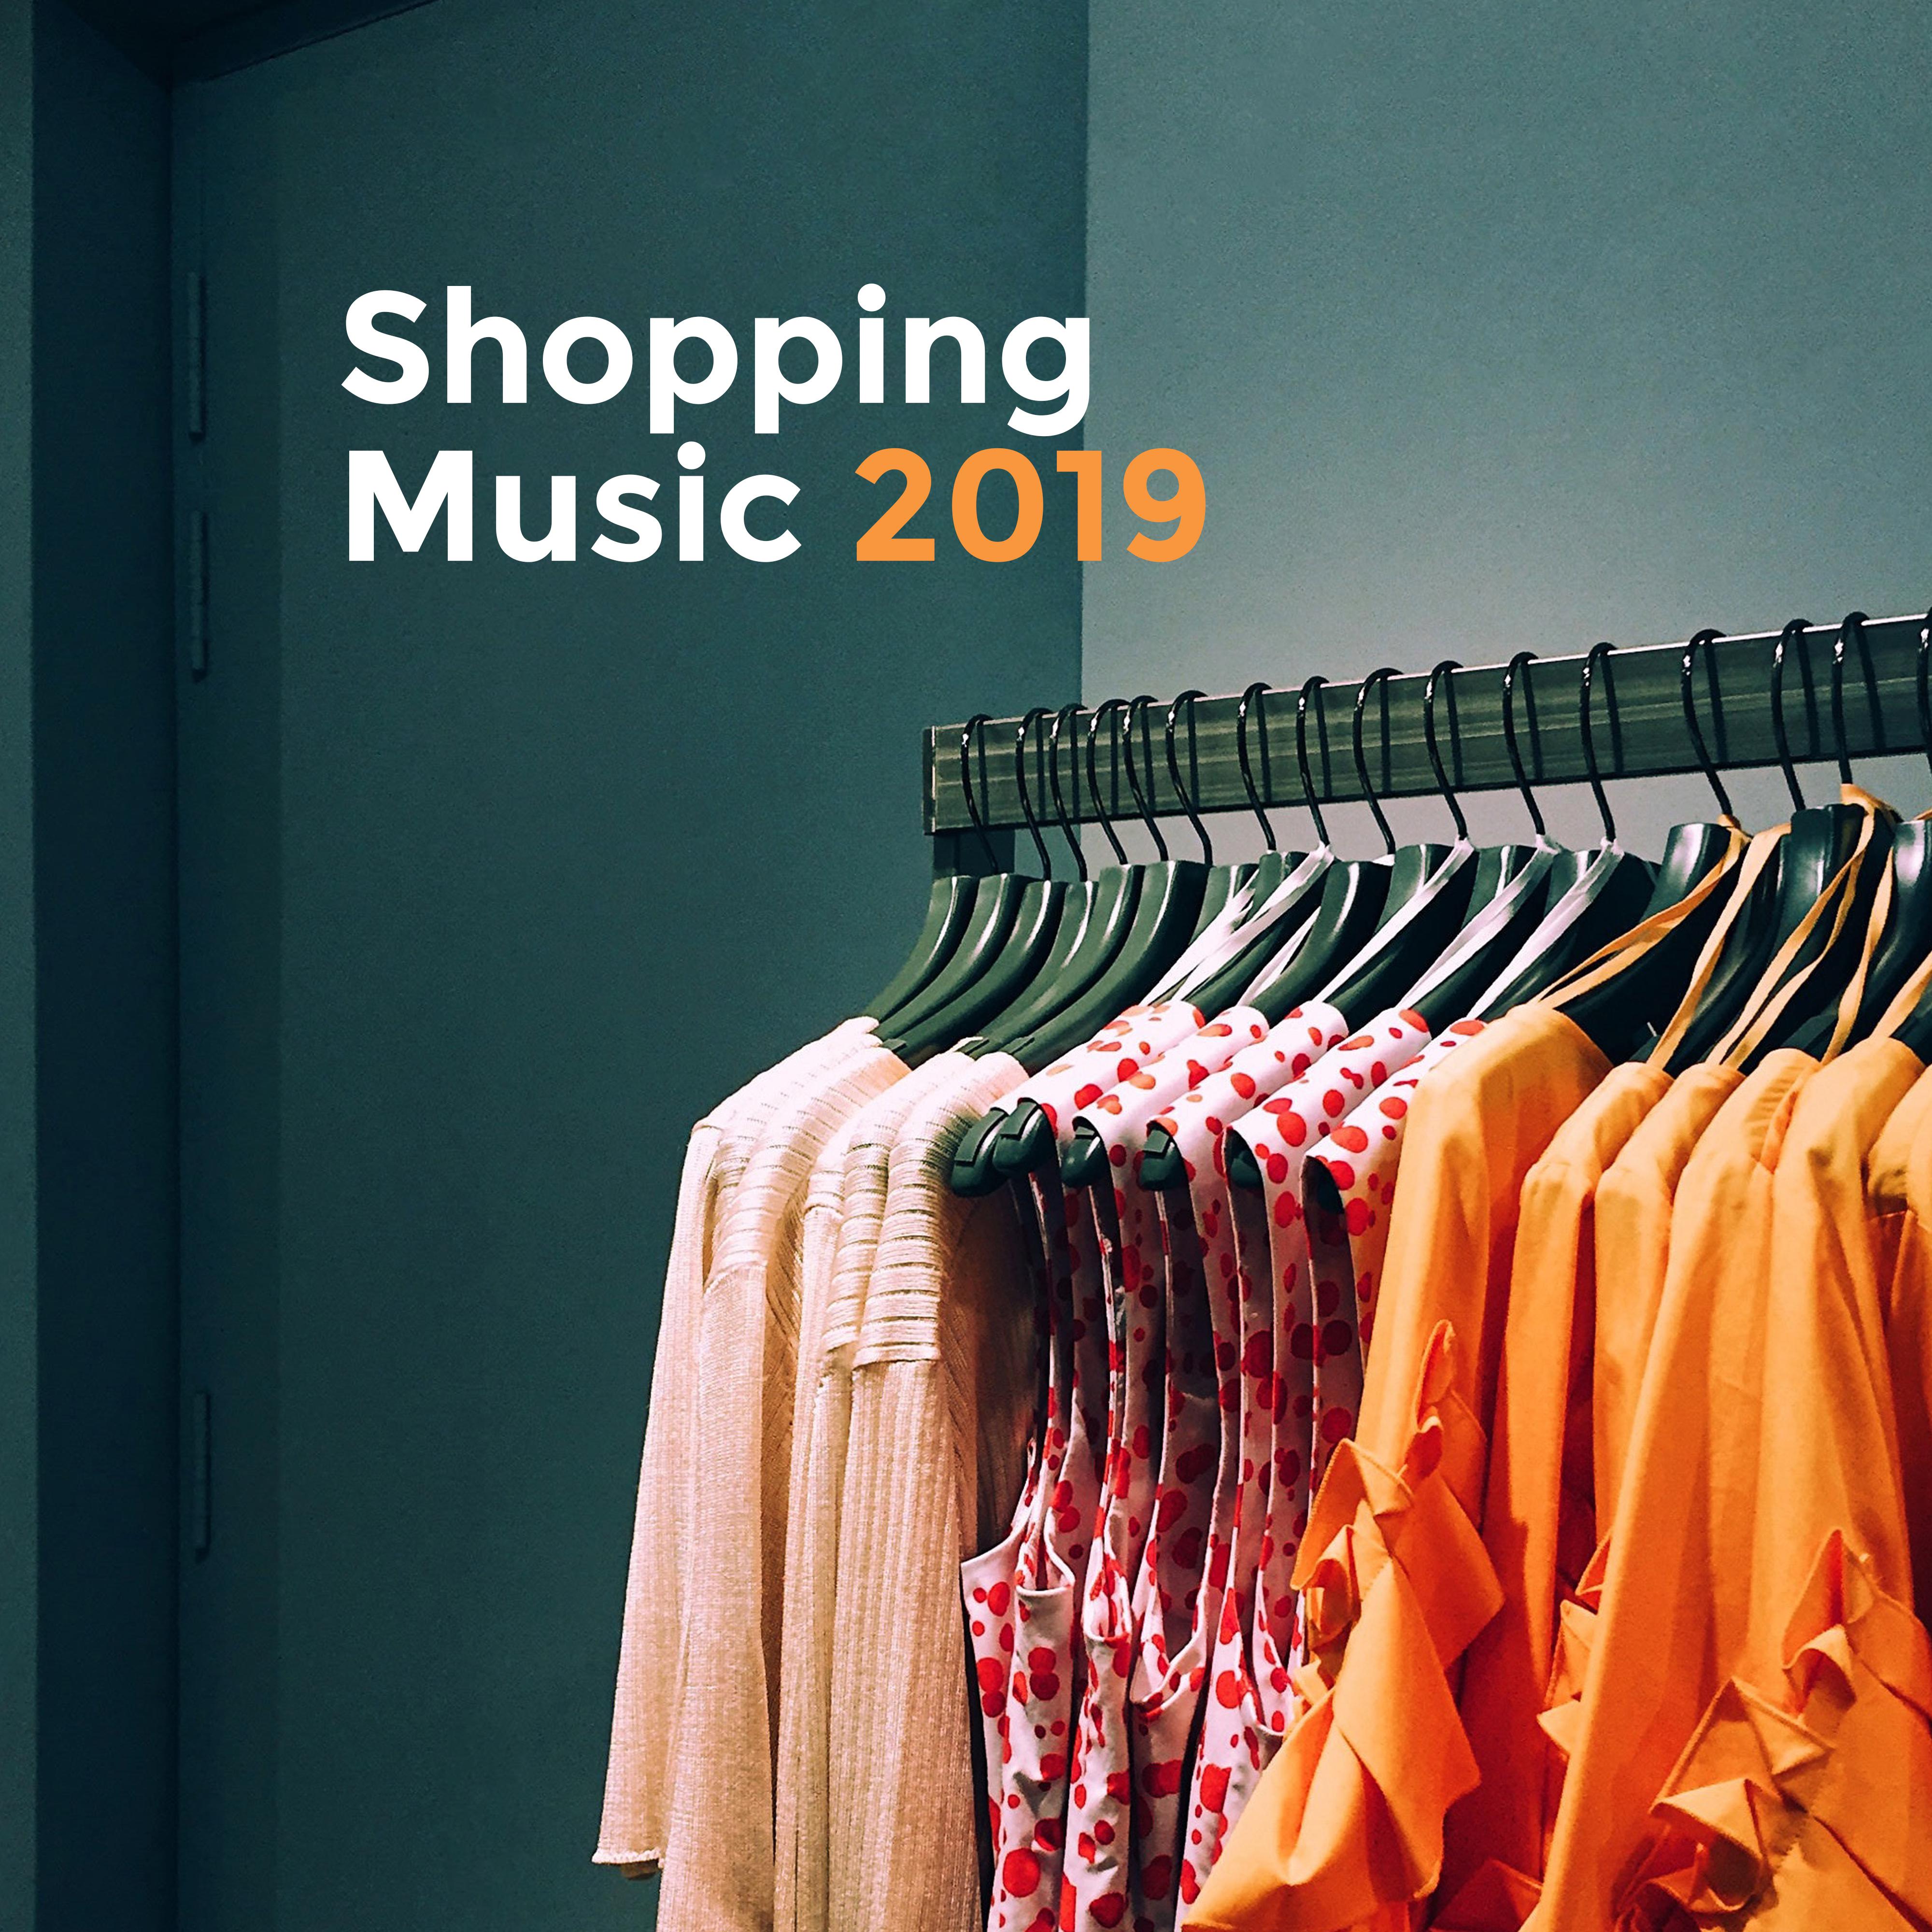 Shopping Music 2019 – Relaxing Beats for Shop, Chillout Shopping, Lounge Music, Relax After Work